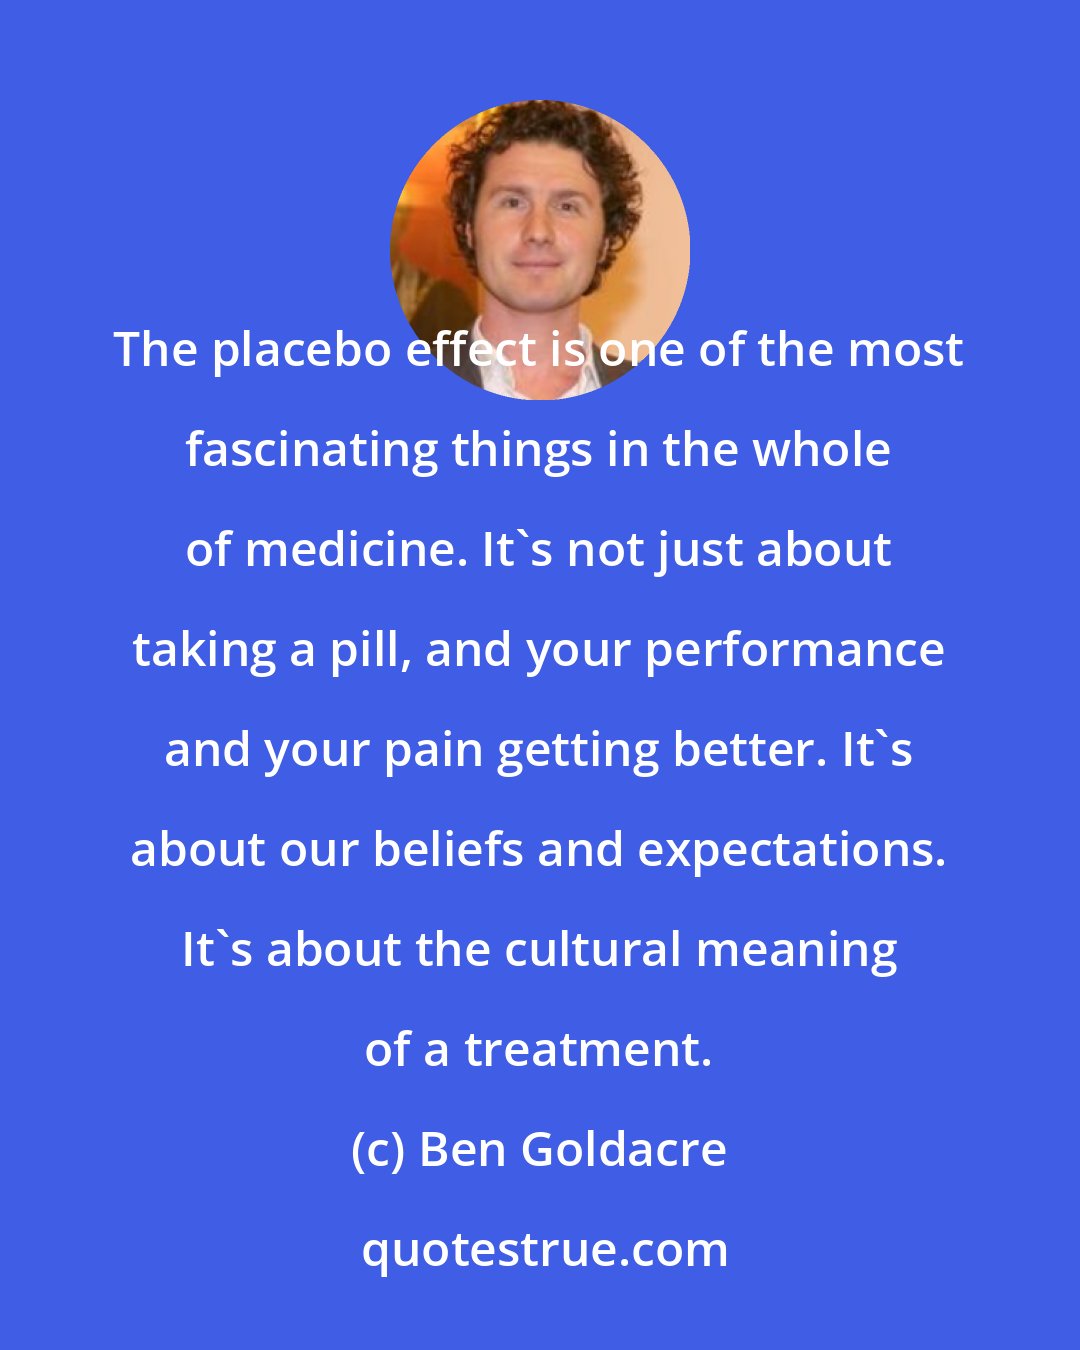 Ben Goldacre: The placebo effect is one of the most fascinating things in the whole of medicine. It's not just about taking a pill, and your performance and your pain getting better. It's about our beliefs and expectations. It's about the cultural meaning of a treatment.